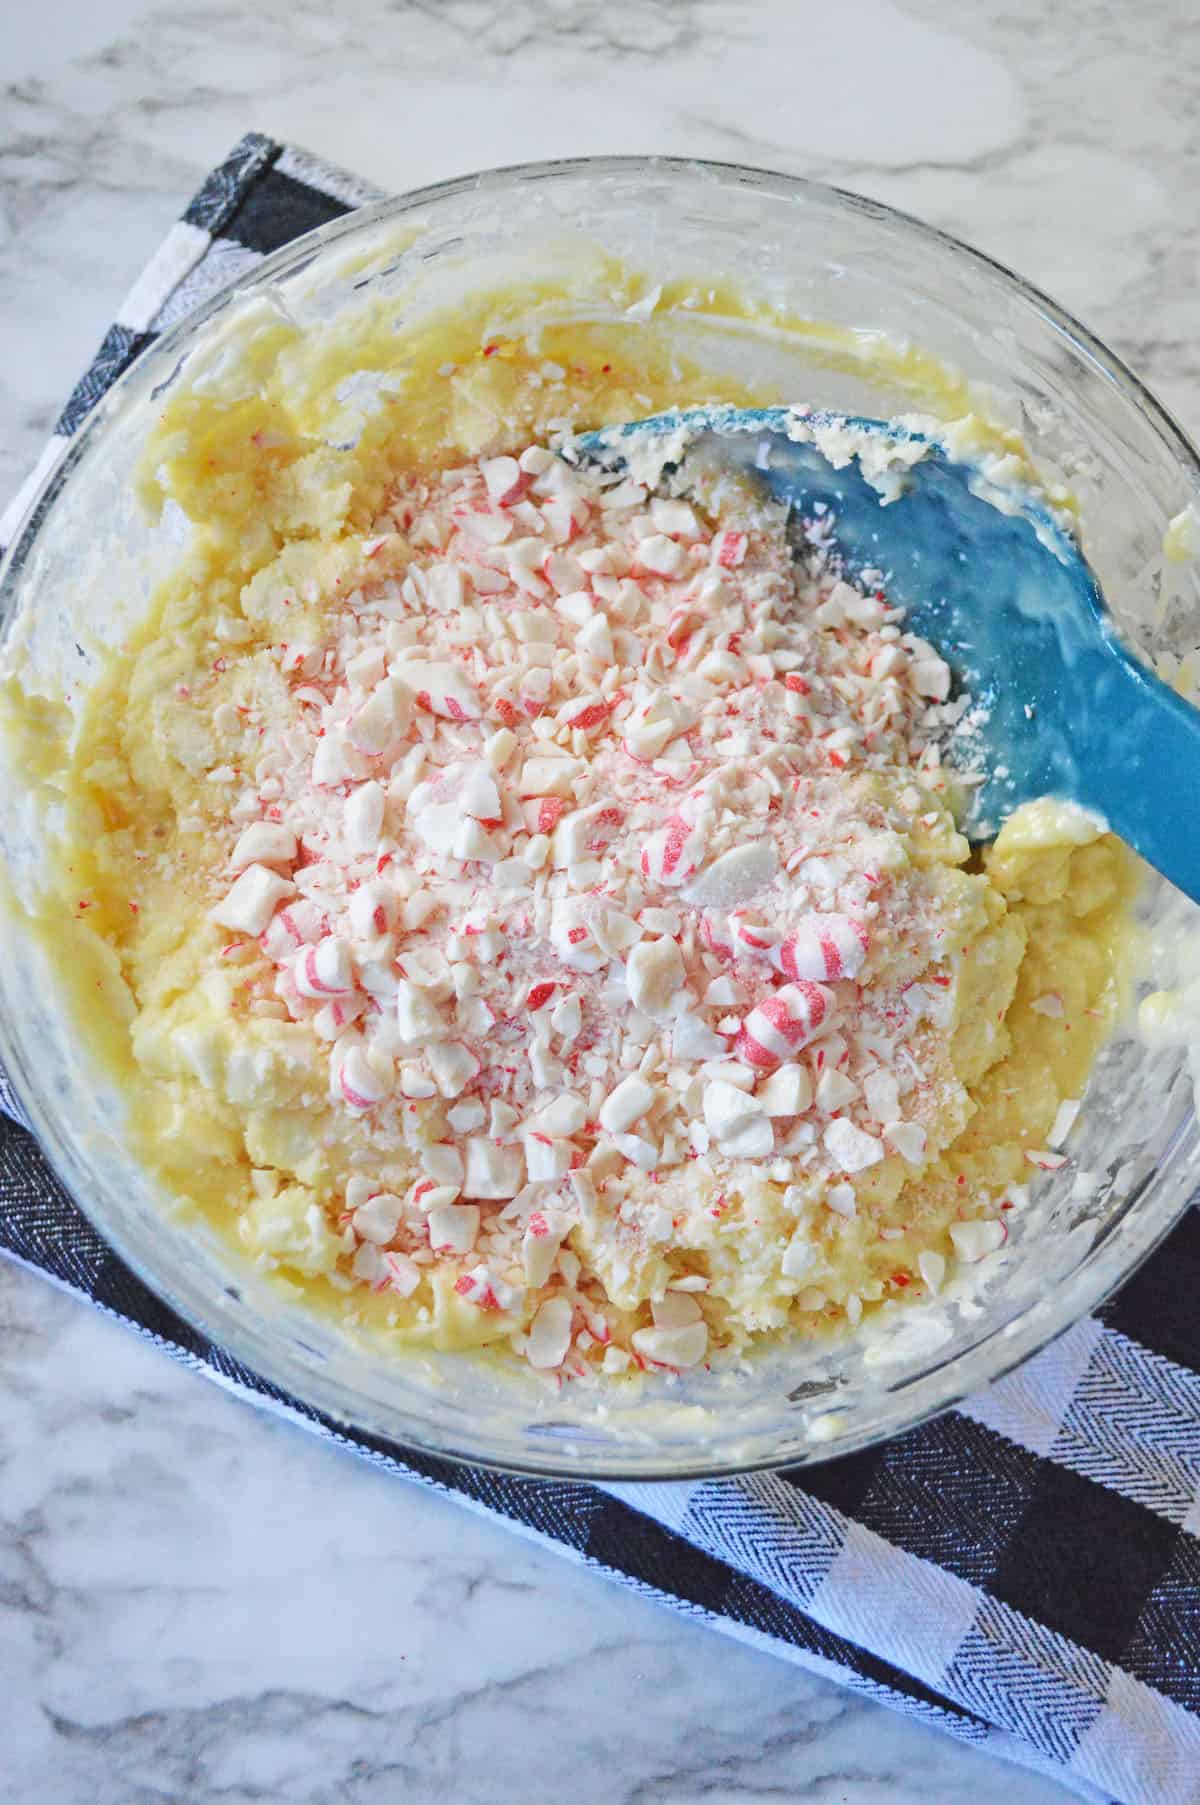 White chocolate chips, condensed milk, and crushed peppermint candies in a glass bowl.